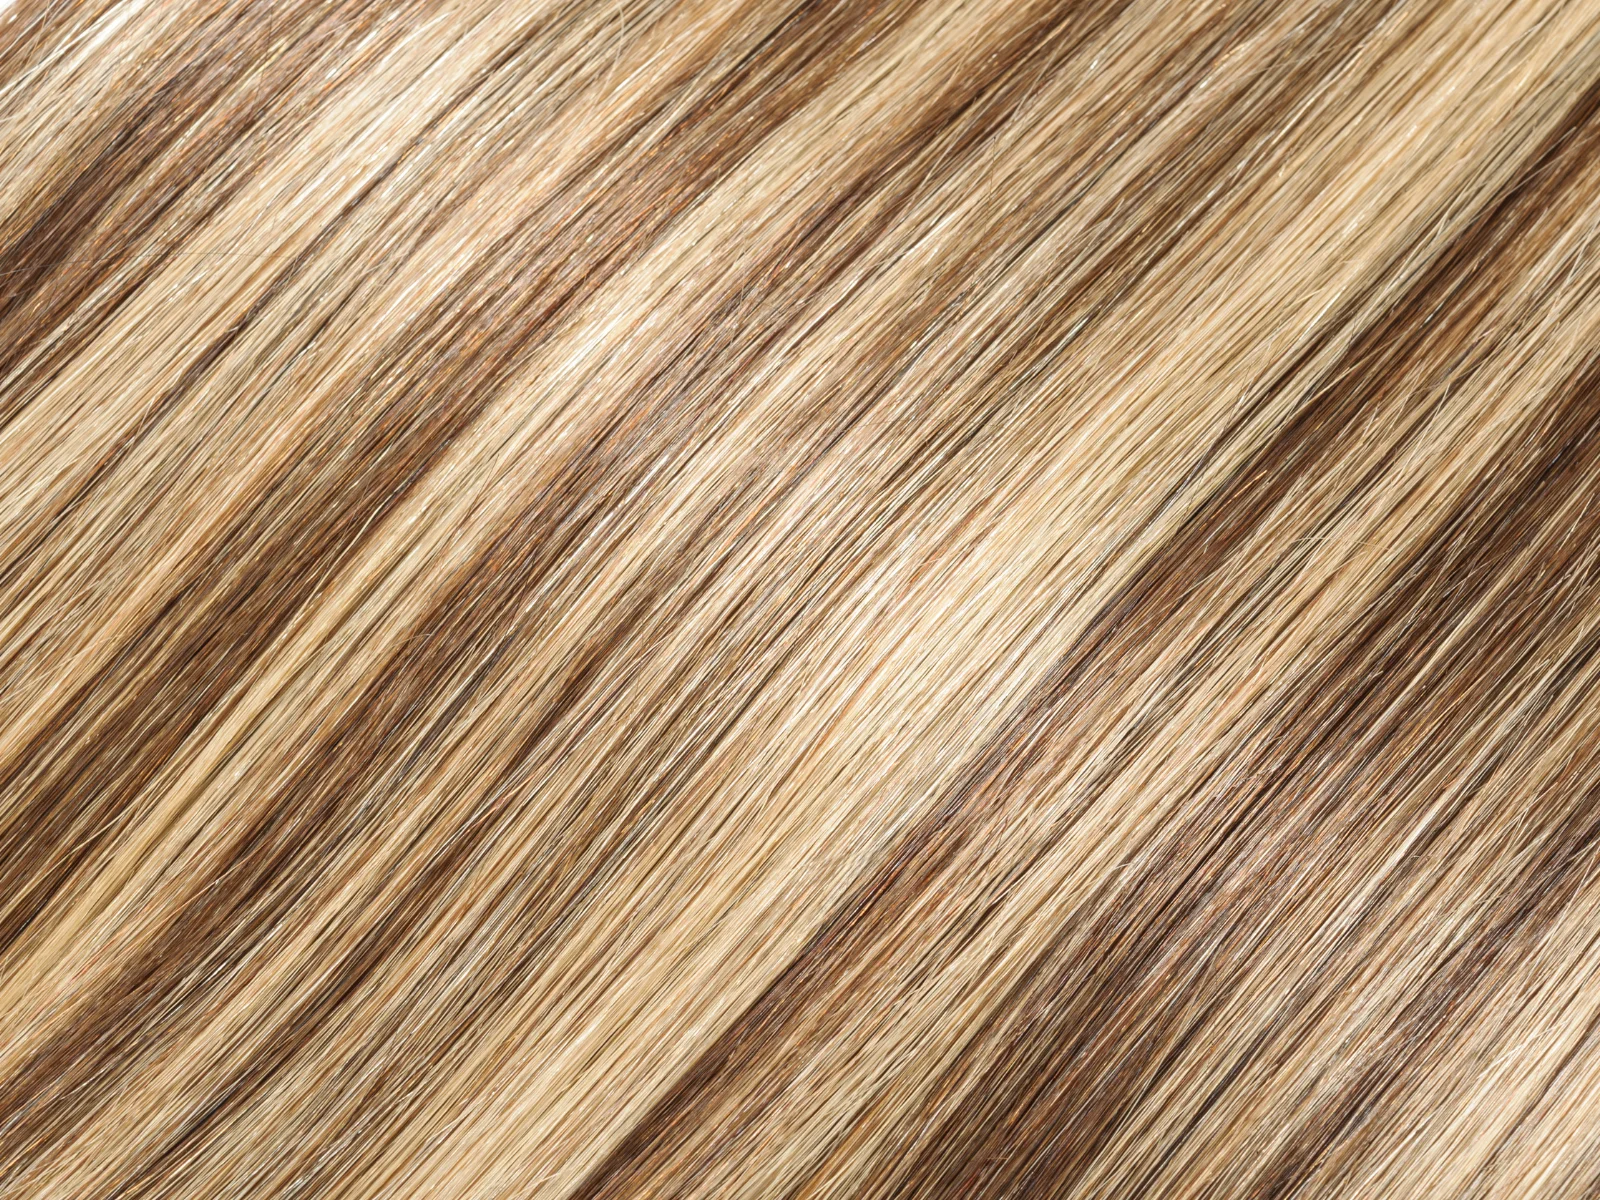 Image titled What Are Lowlights featuring a close up of dyed brown hair